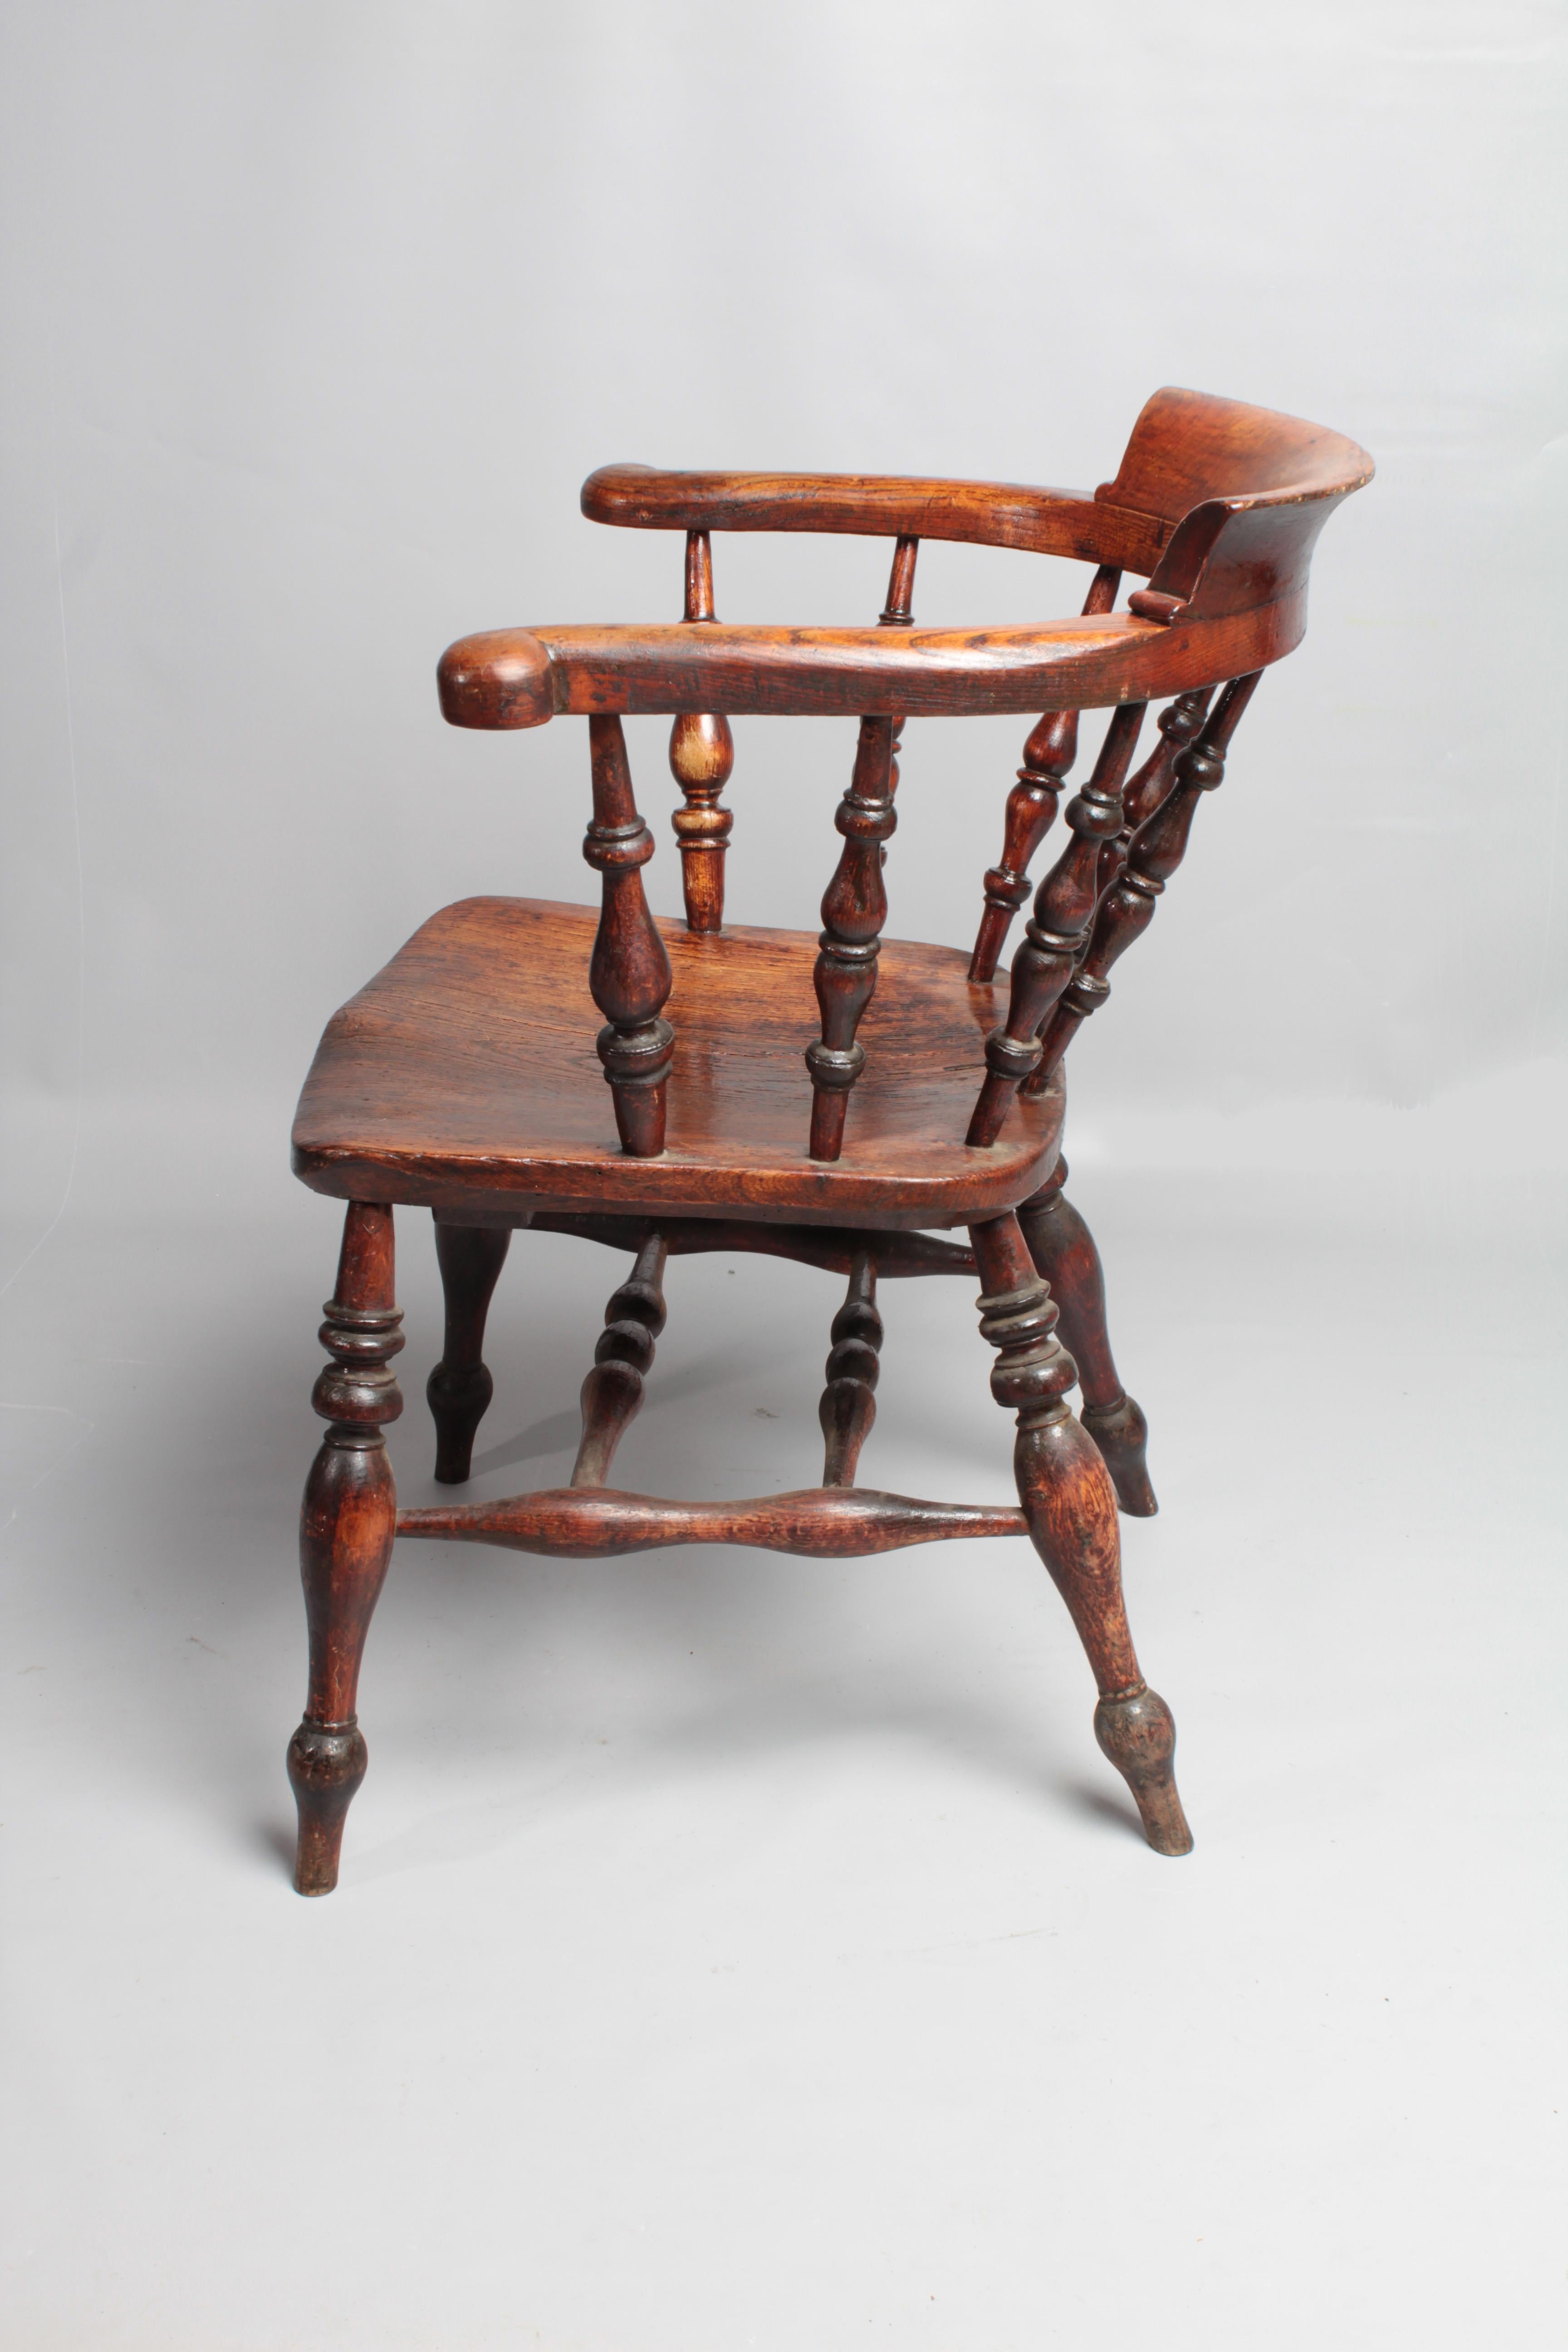 Victorian, spindle bow back 'Smoker's' or 'Captain's' chair.
Aged elm patina with good grain detail in the saddle seat slab. Baluster legs with a double 'H' stretcher and turned spindles supporting the horseshoe armrest and out-turned scrolled hand